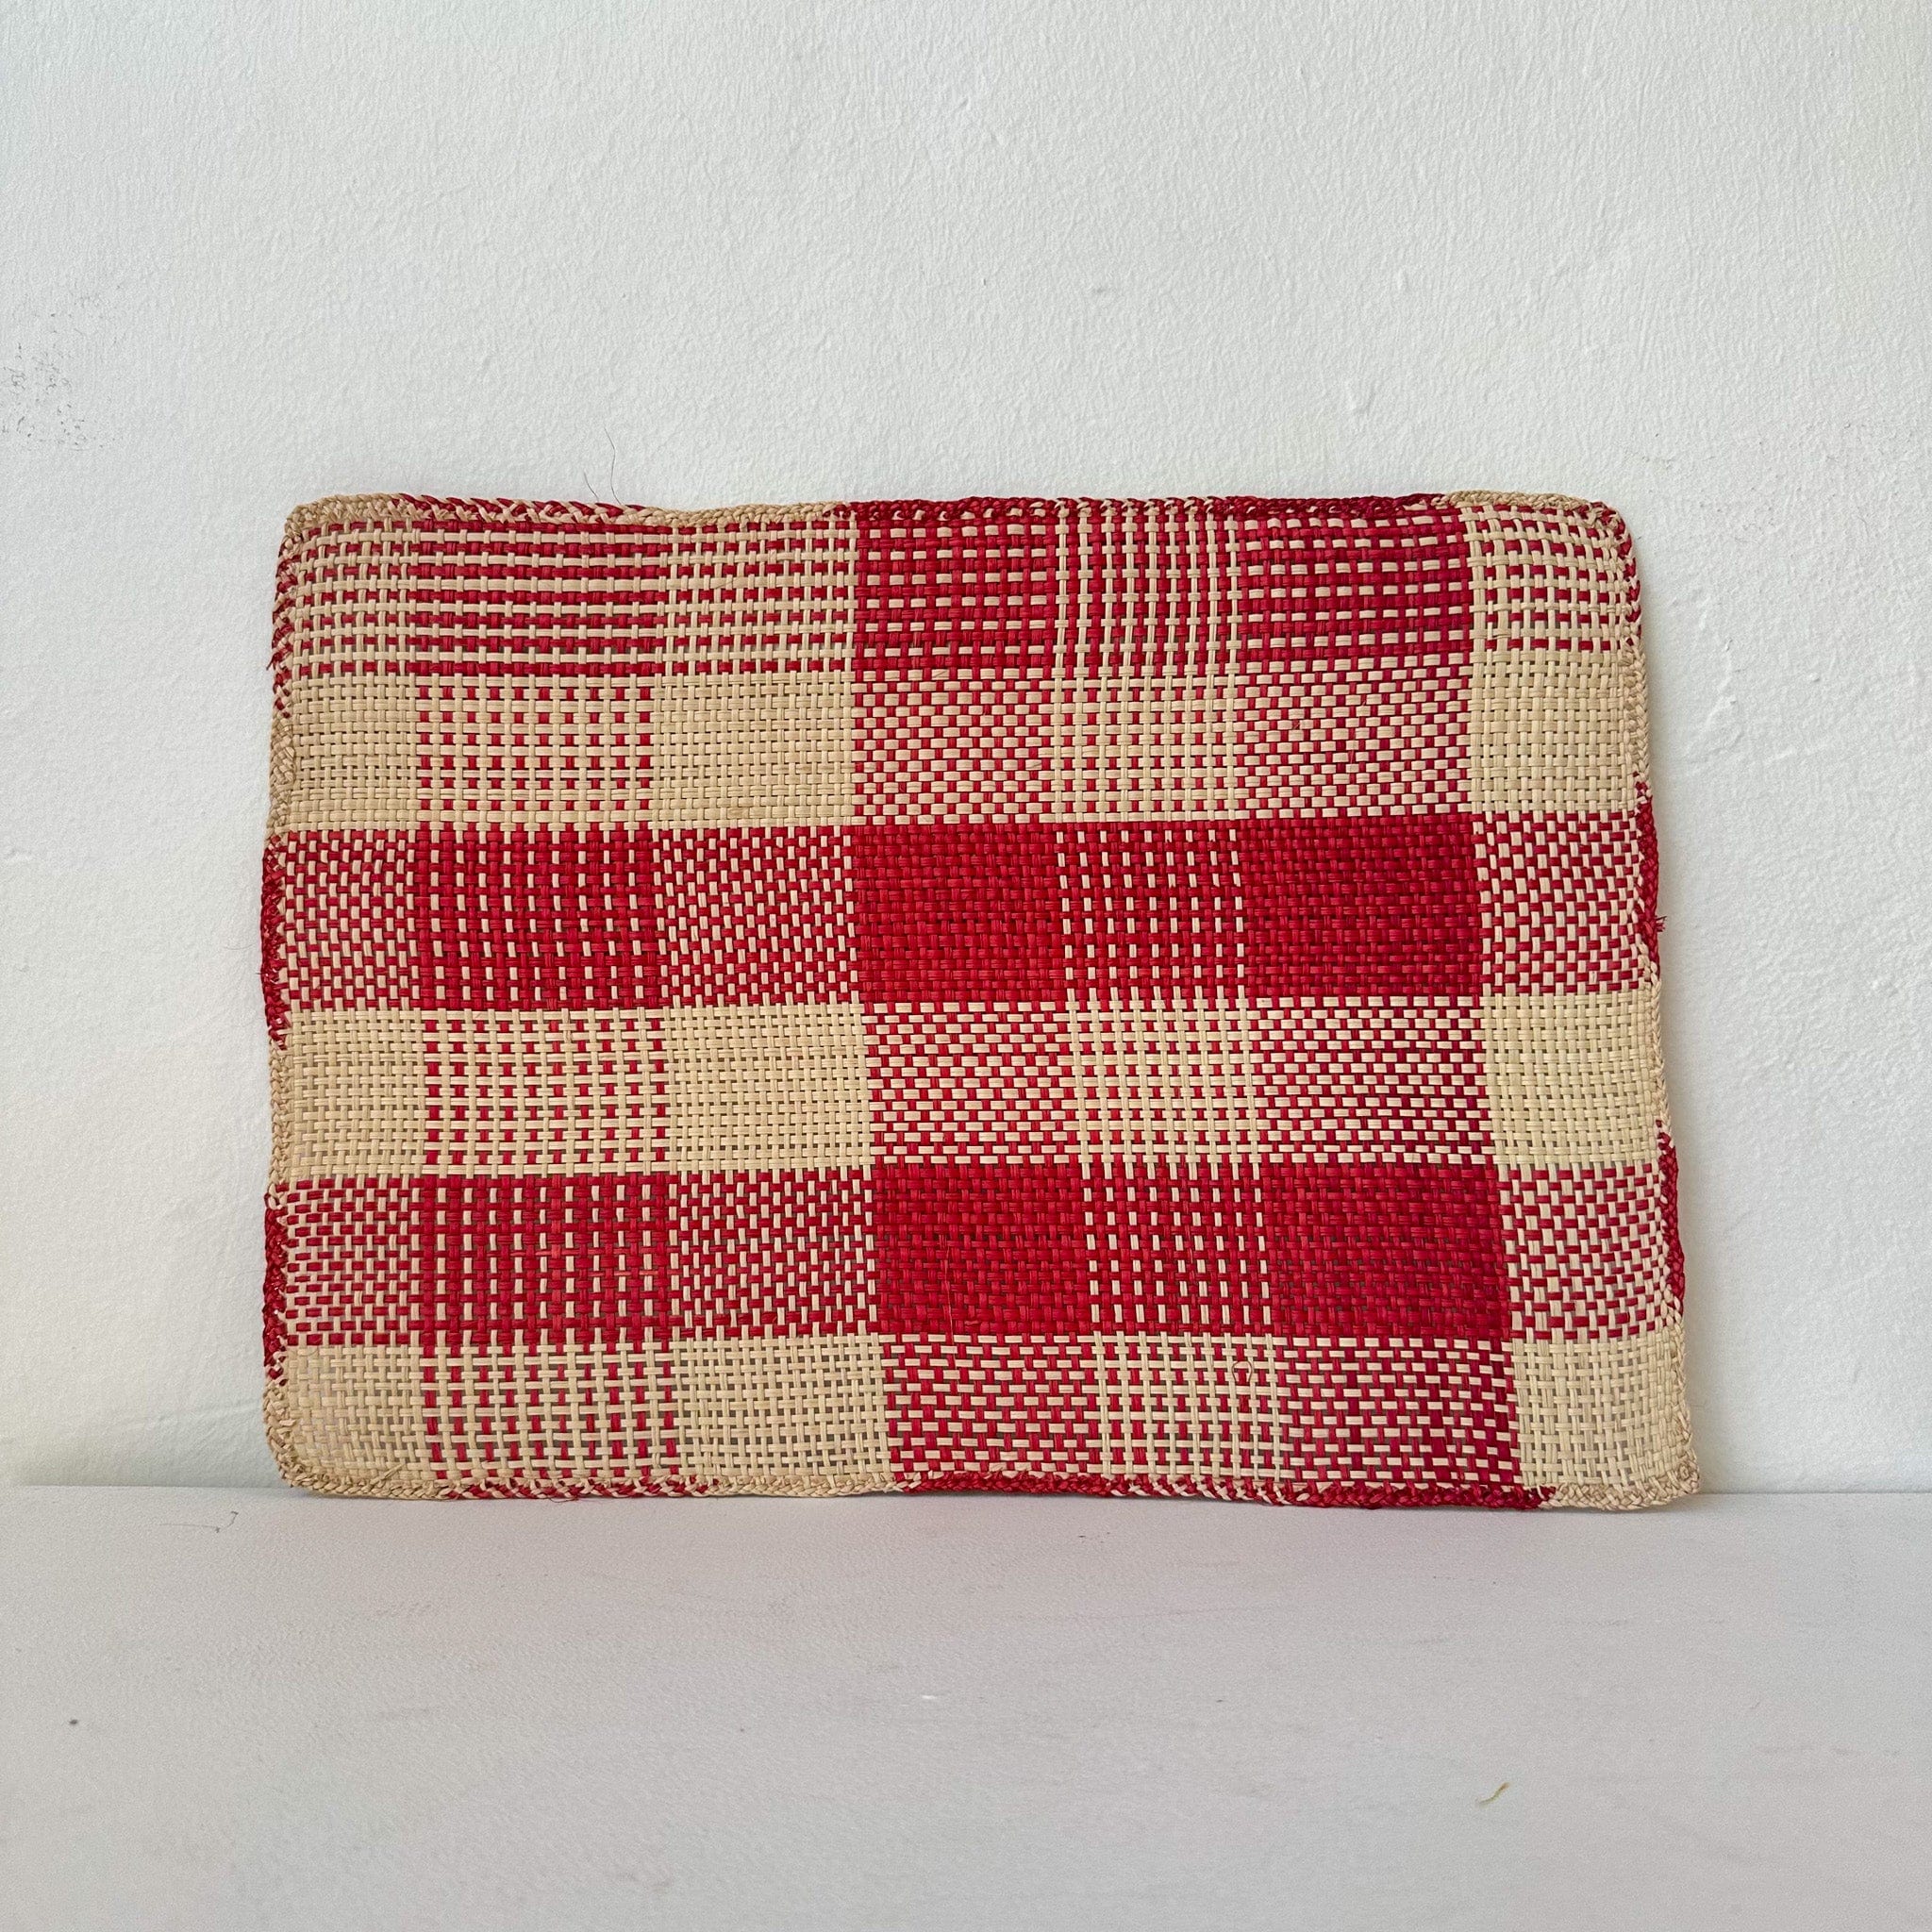 Guanabana Placemats Straw placemat  in Red + Beige Plaid - by Guanabana